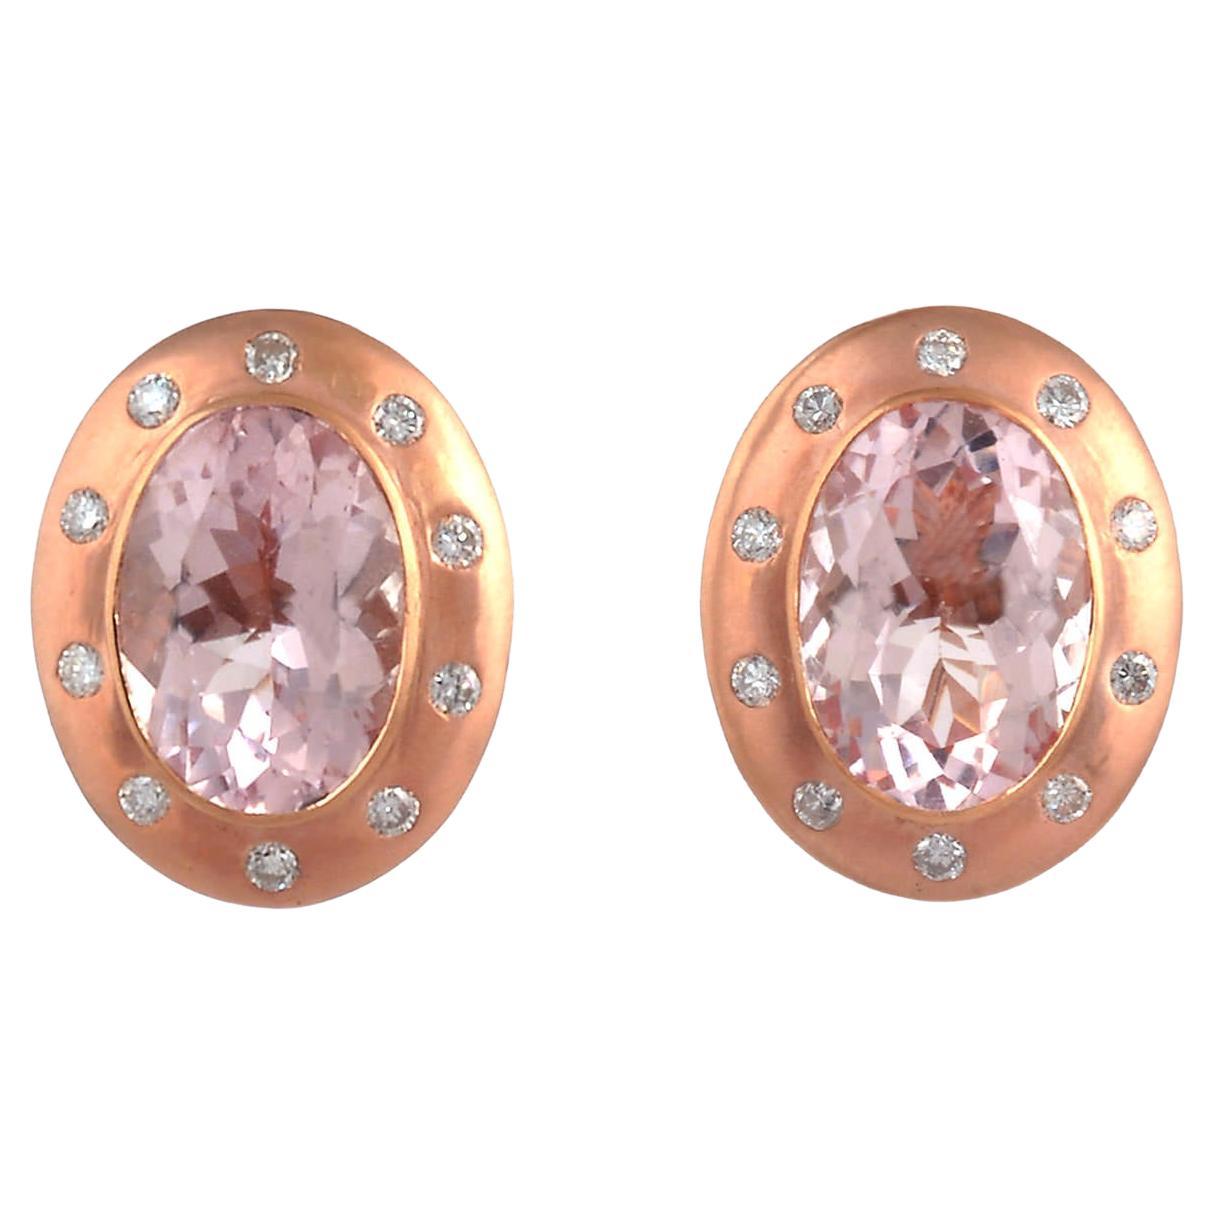 Morganite Stud Earring With Diamonds Made In 18k Rose Gold